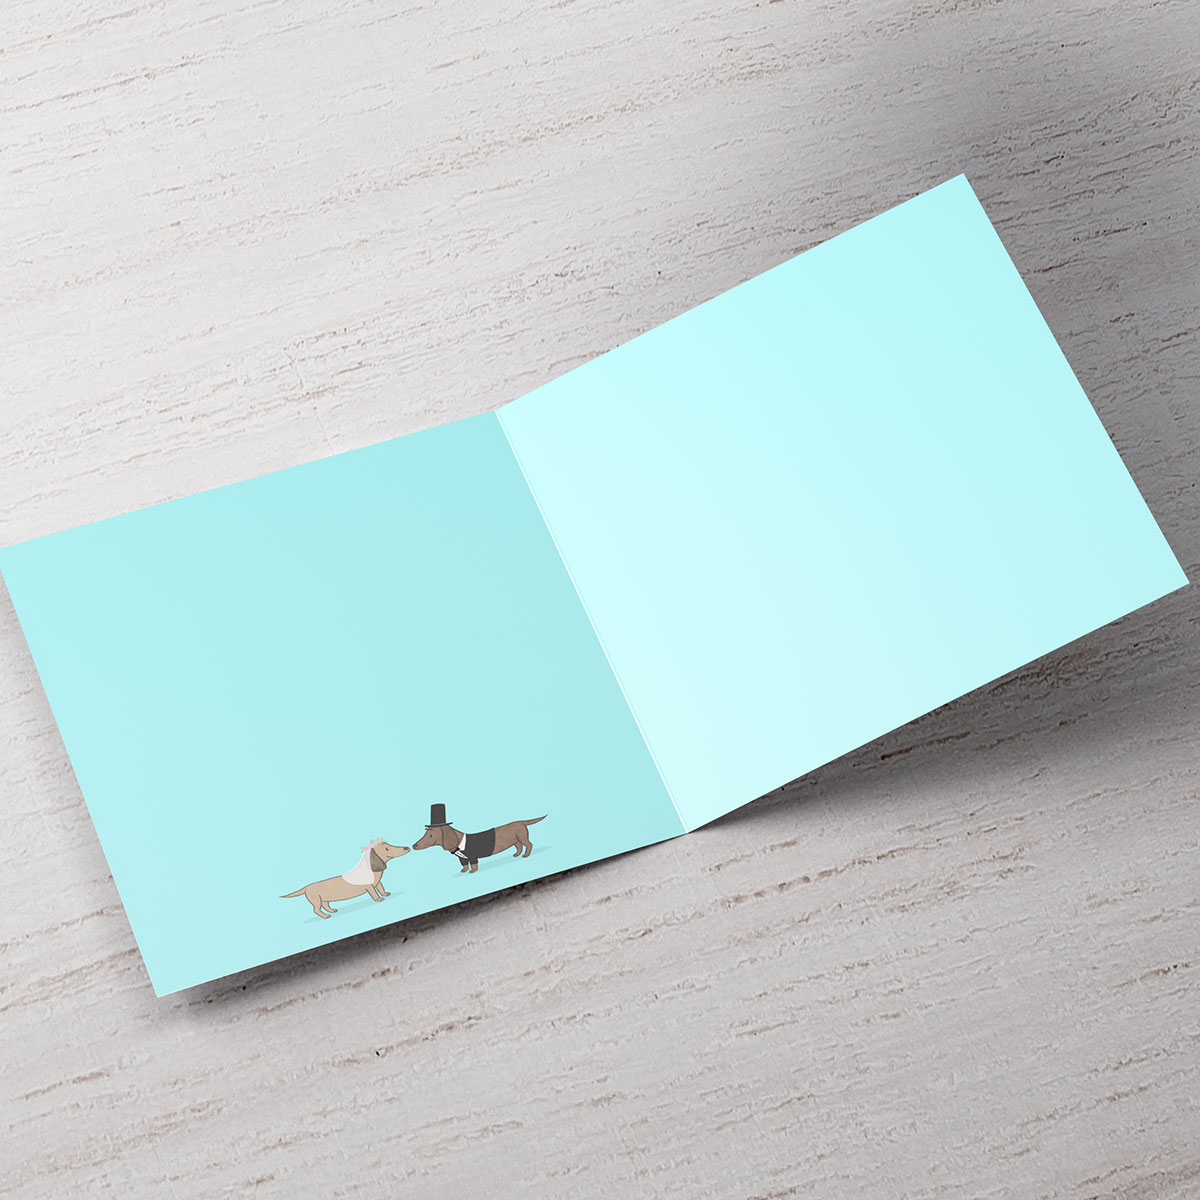 Personalised Wedding Card - With Woof On Your Big Day